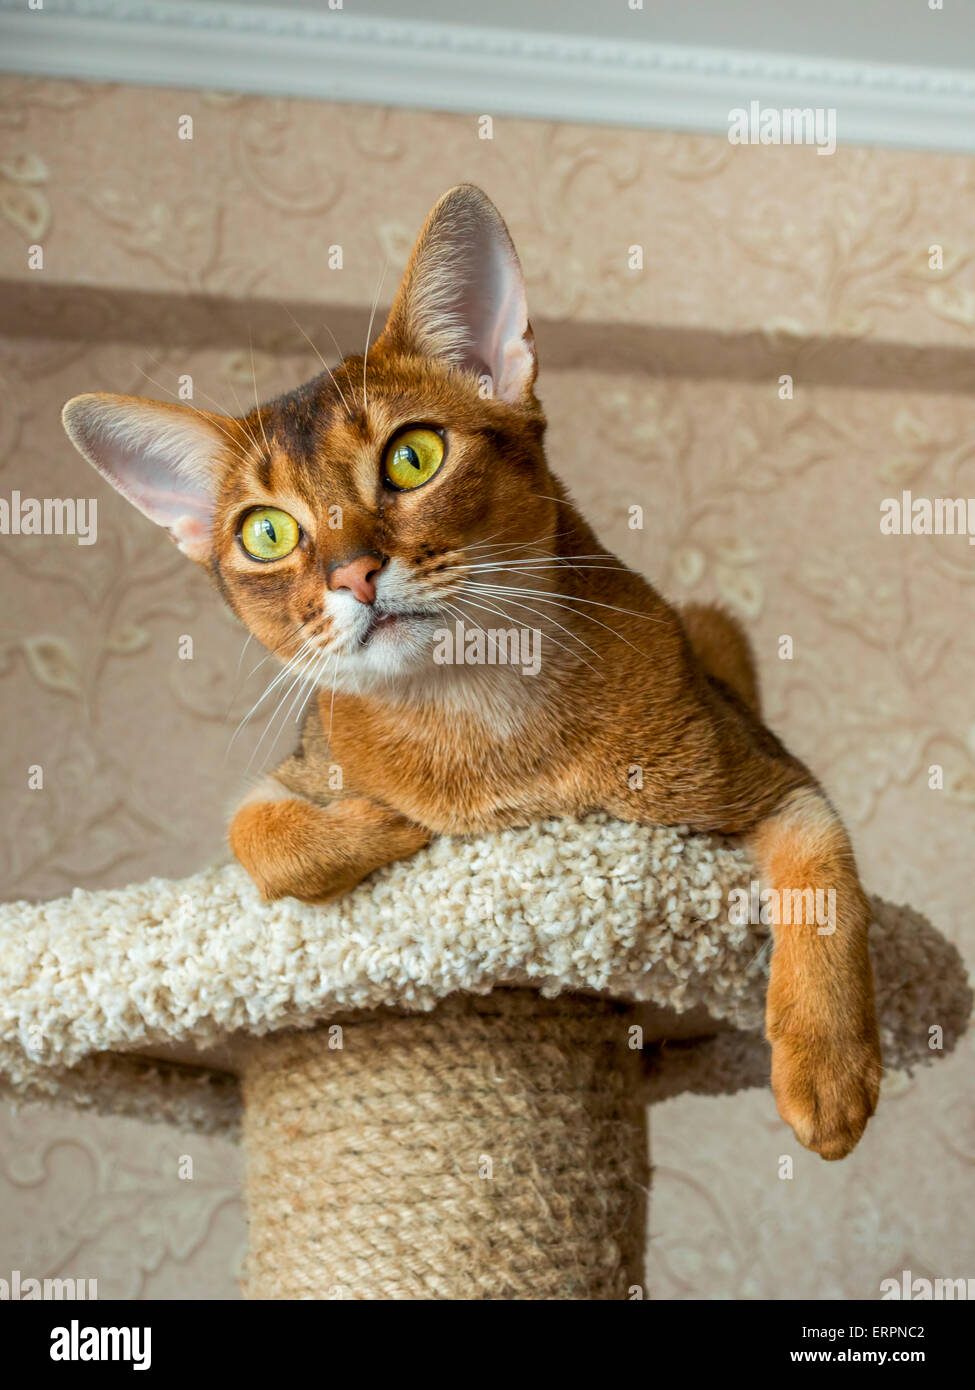 Abyssinian cat lying at cat tree furniture Stock Photo